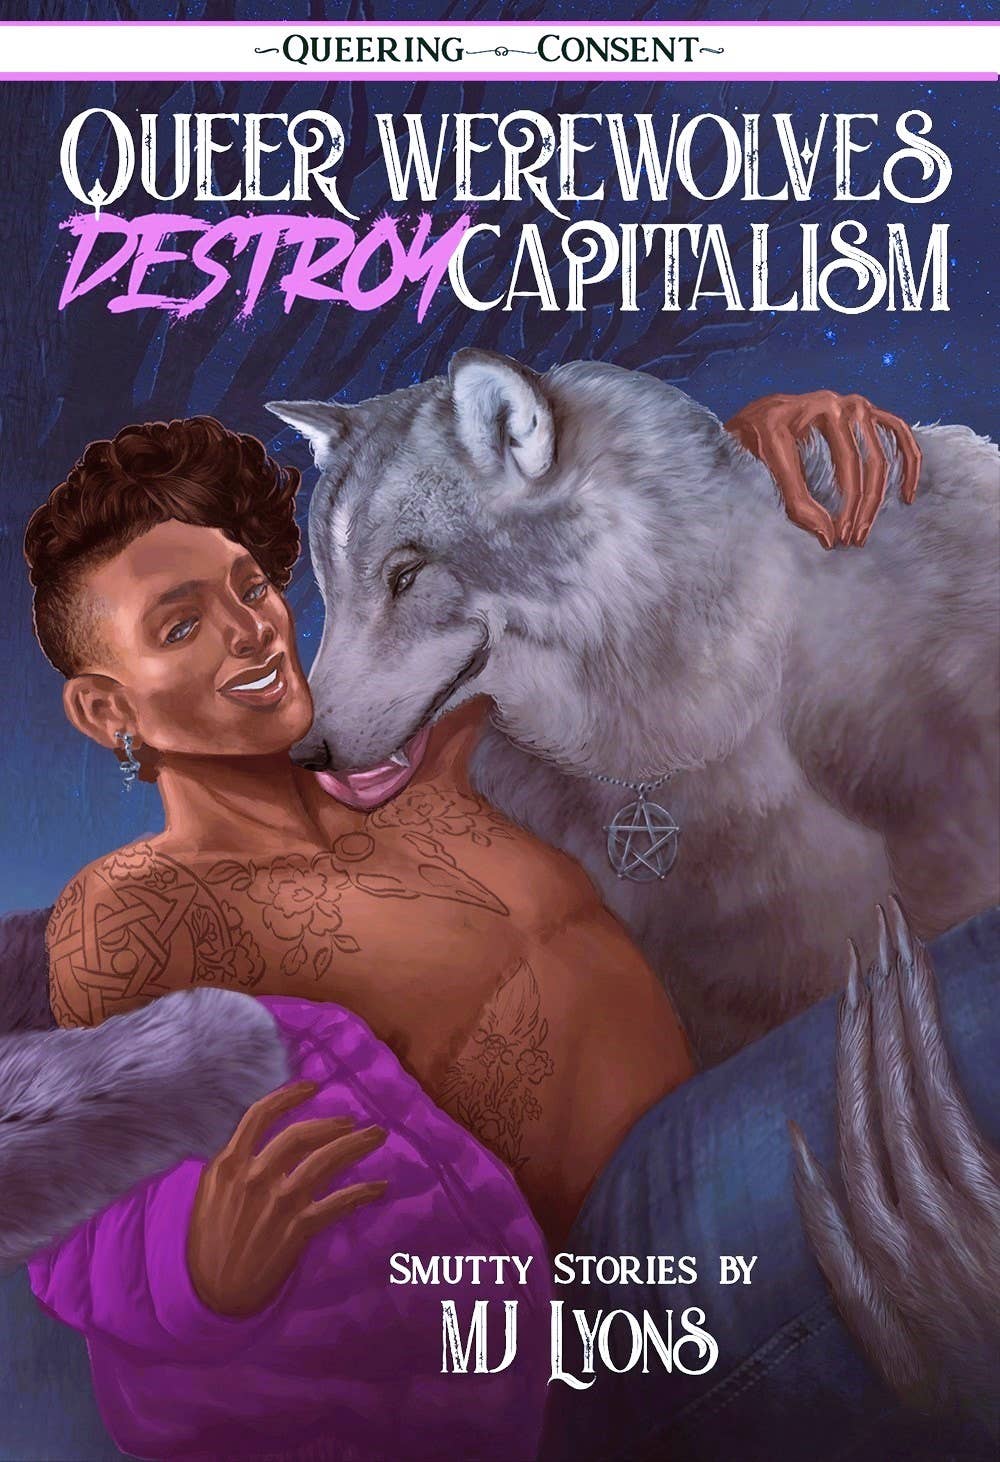 Microcosm Publishing & Distribution - Queer Werewolves Destroy Capitalism: Smutty Stories